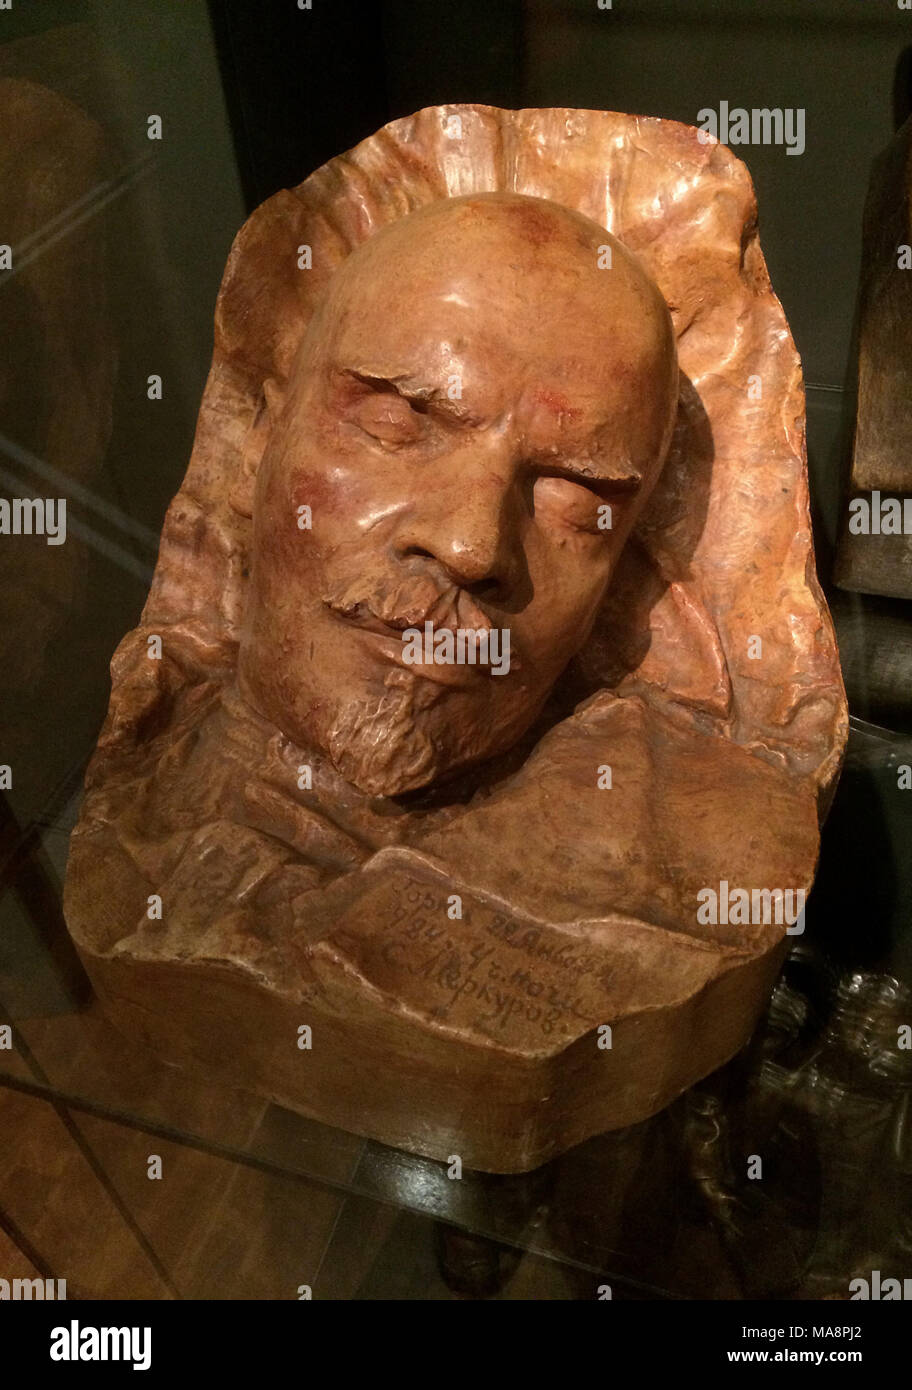 Death mask of Vladimir Lenin on display at the exhibition in the Gеrmаn Нistоrical Мusеum (Dеutschеs Нistоrischеs Мusеum) in Веrlin, Gеrmany. The death mask was taken by Russian and Soviet sculptor Sergey Merkurov on 22 January 1924 at 4 am in the Gorki Estate near Moscow, where Lenin died. The exhibition devoted to the centenary of the Russian Revolution runs till 15 April 2018. Stock Photo